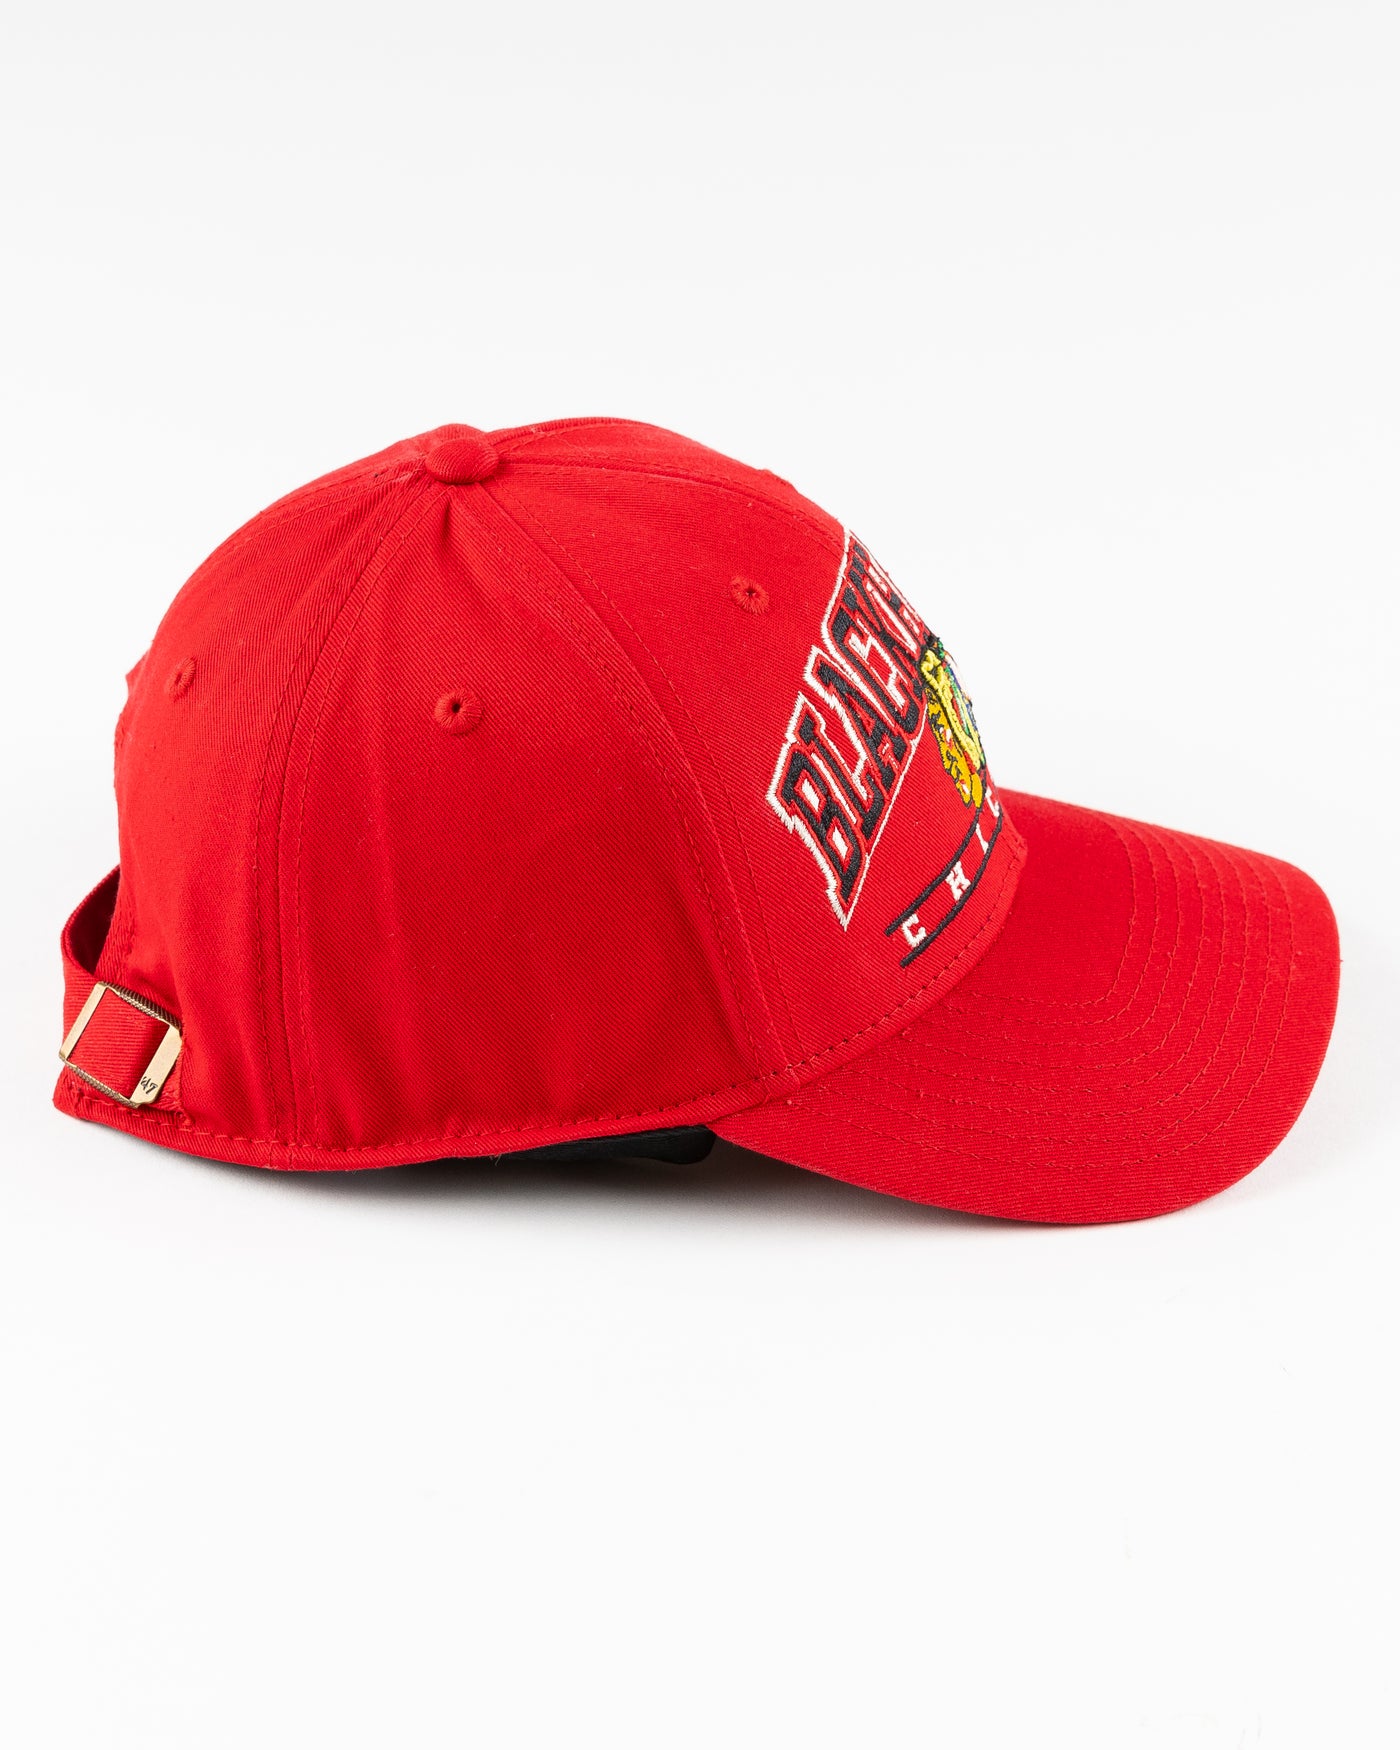 red '47 brand baseball cap with Chicago Blackhawks graphic embroidered on front - right side lay flat